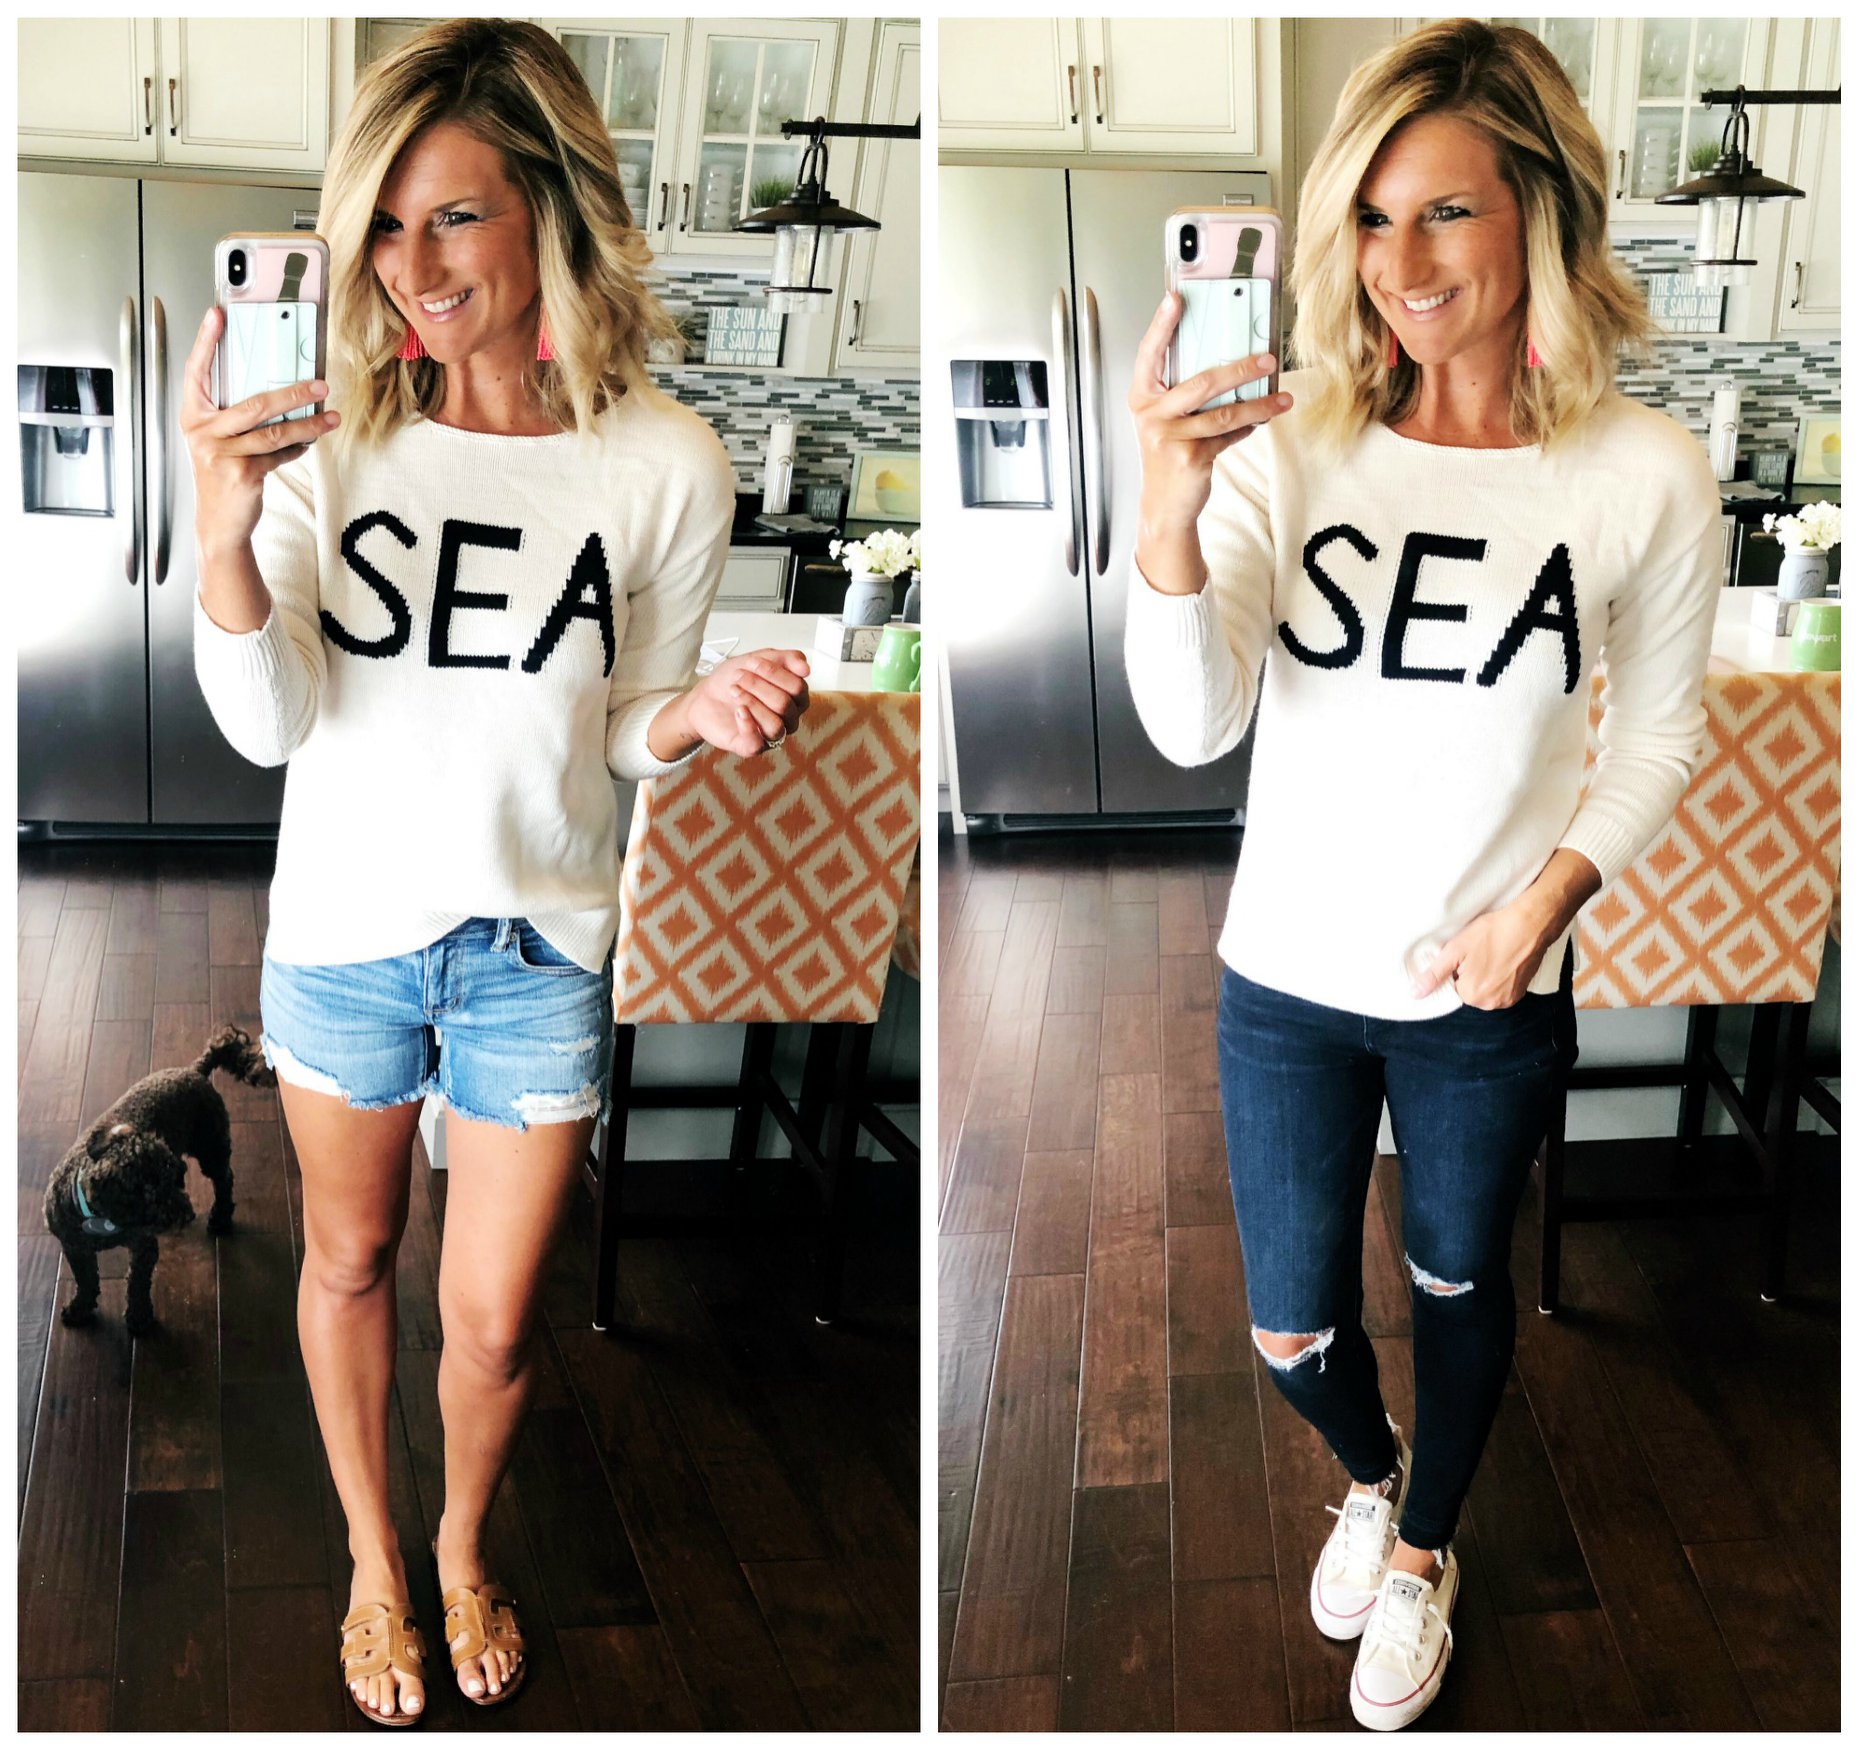 Summer Sweater // What to Wear with a Sweater in the Summer // White Sweater for cooler Summer Nights and Boat Rides // Outfit of the Day